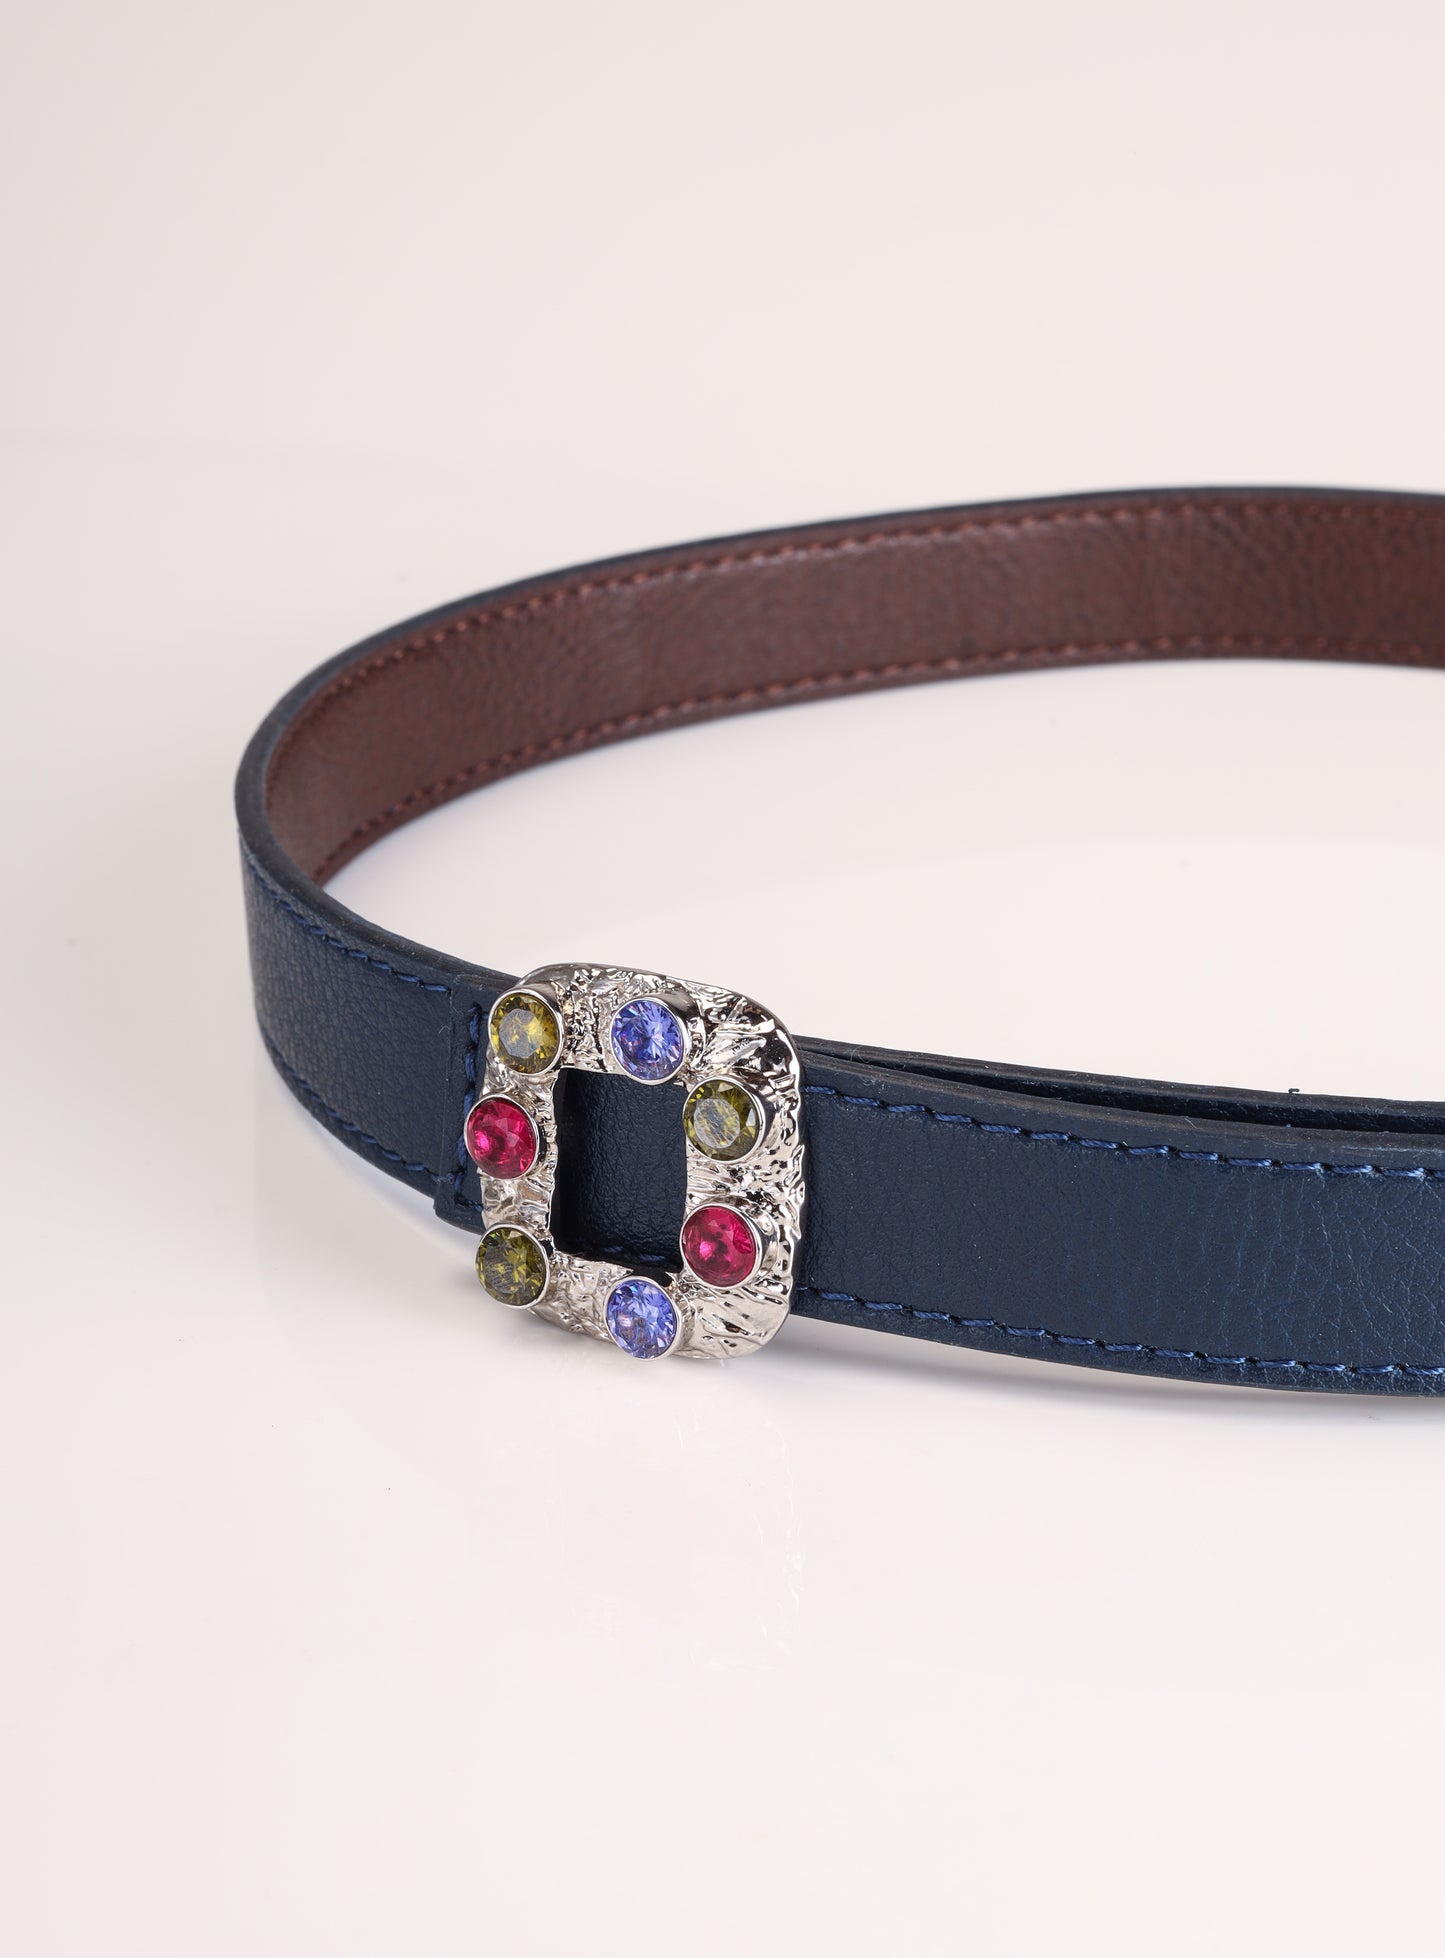 20 mm Reversible Belt With Buckle